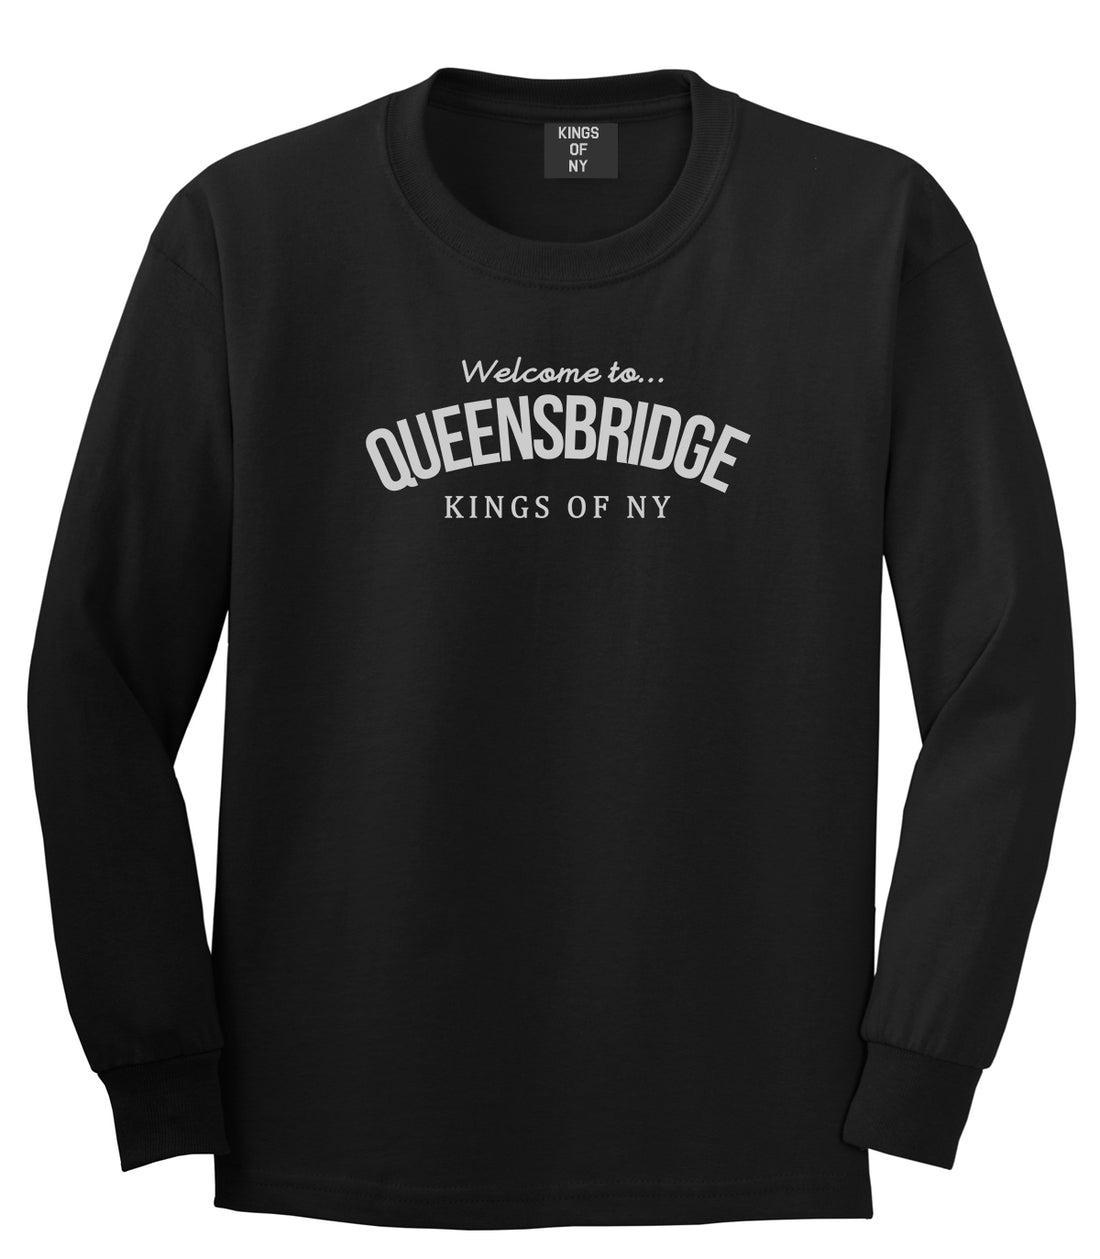 Welcome To Queensbridge Mens Long Sleeve T-Shirt Black by Kings Of NY